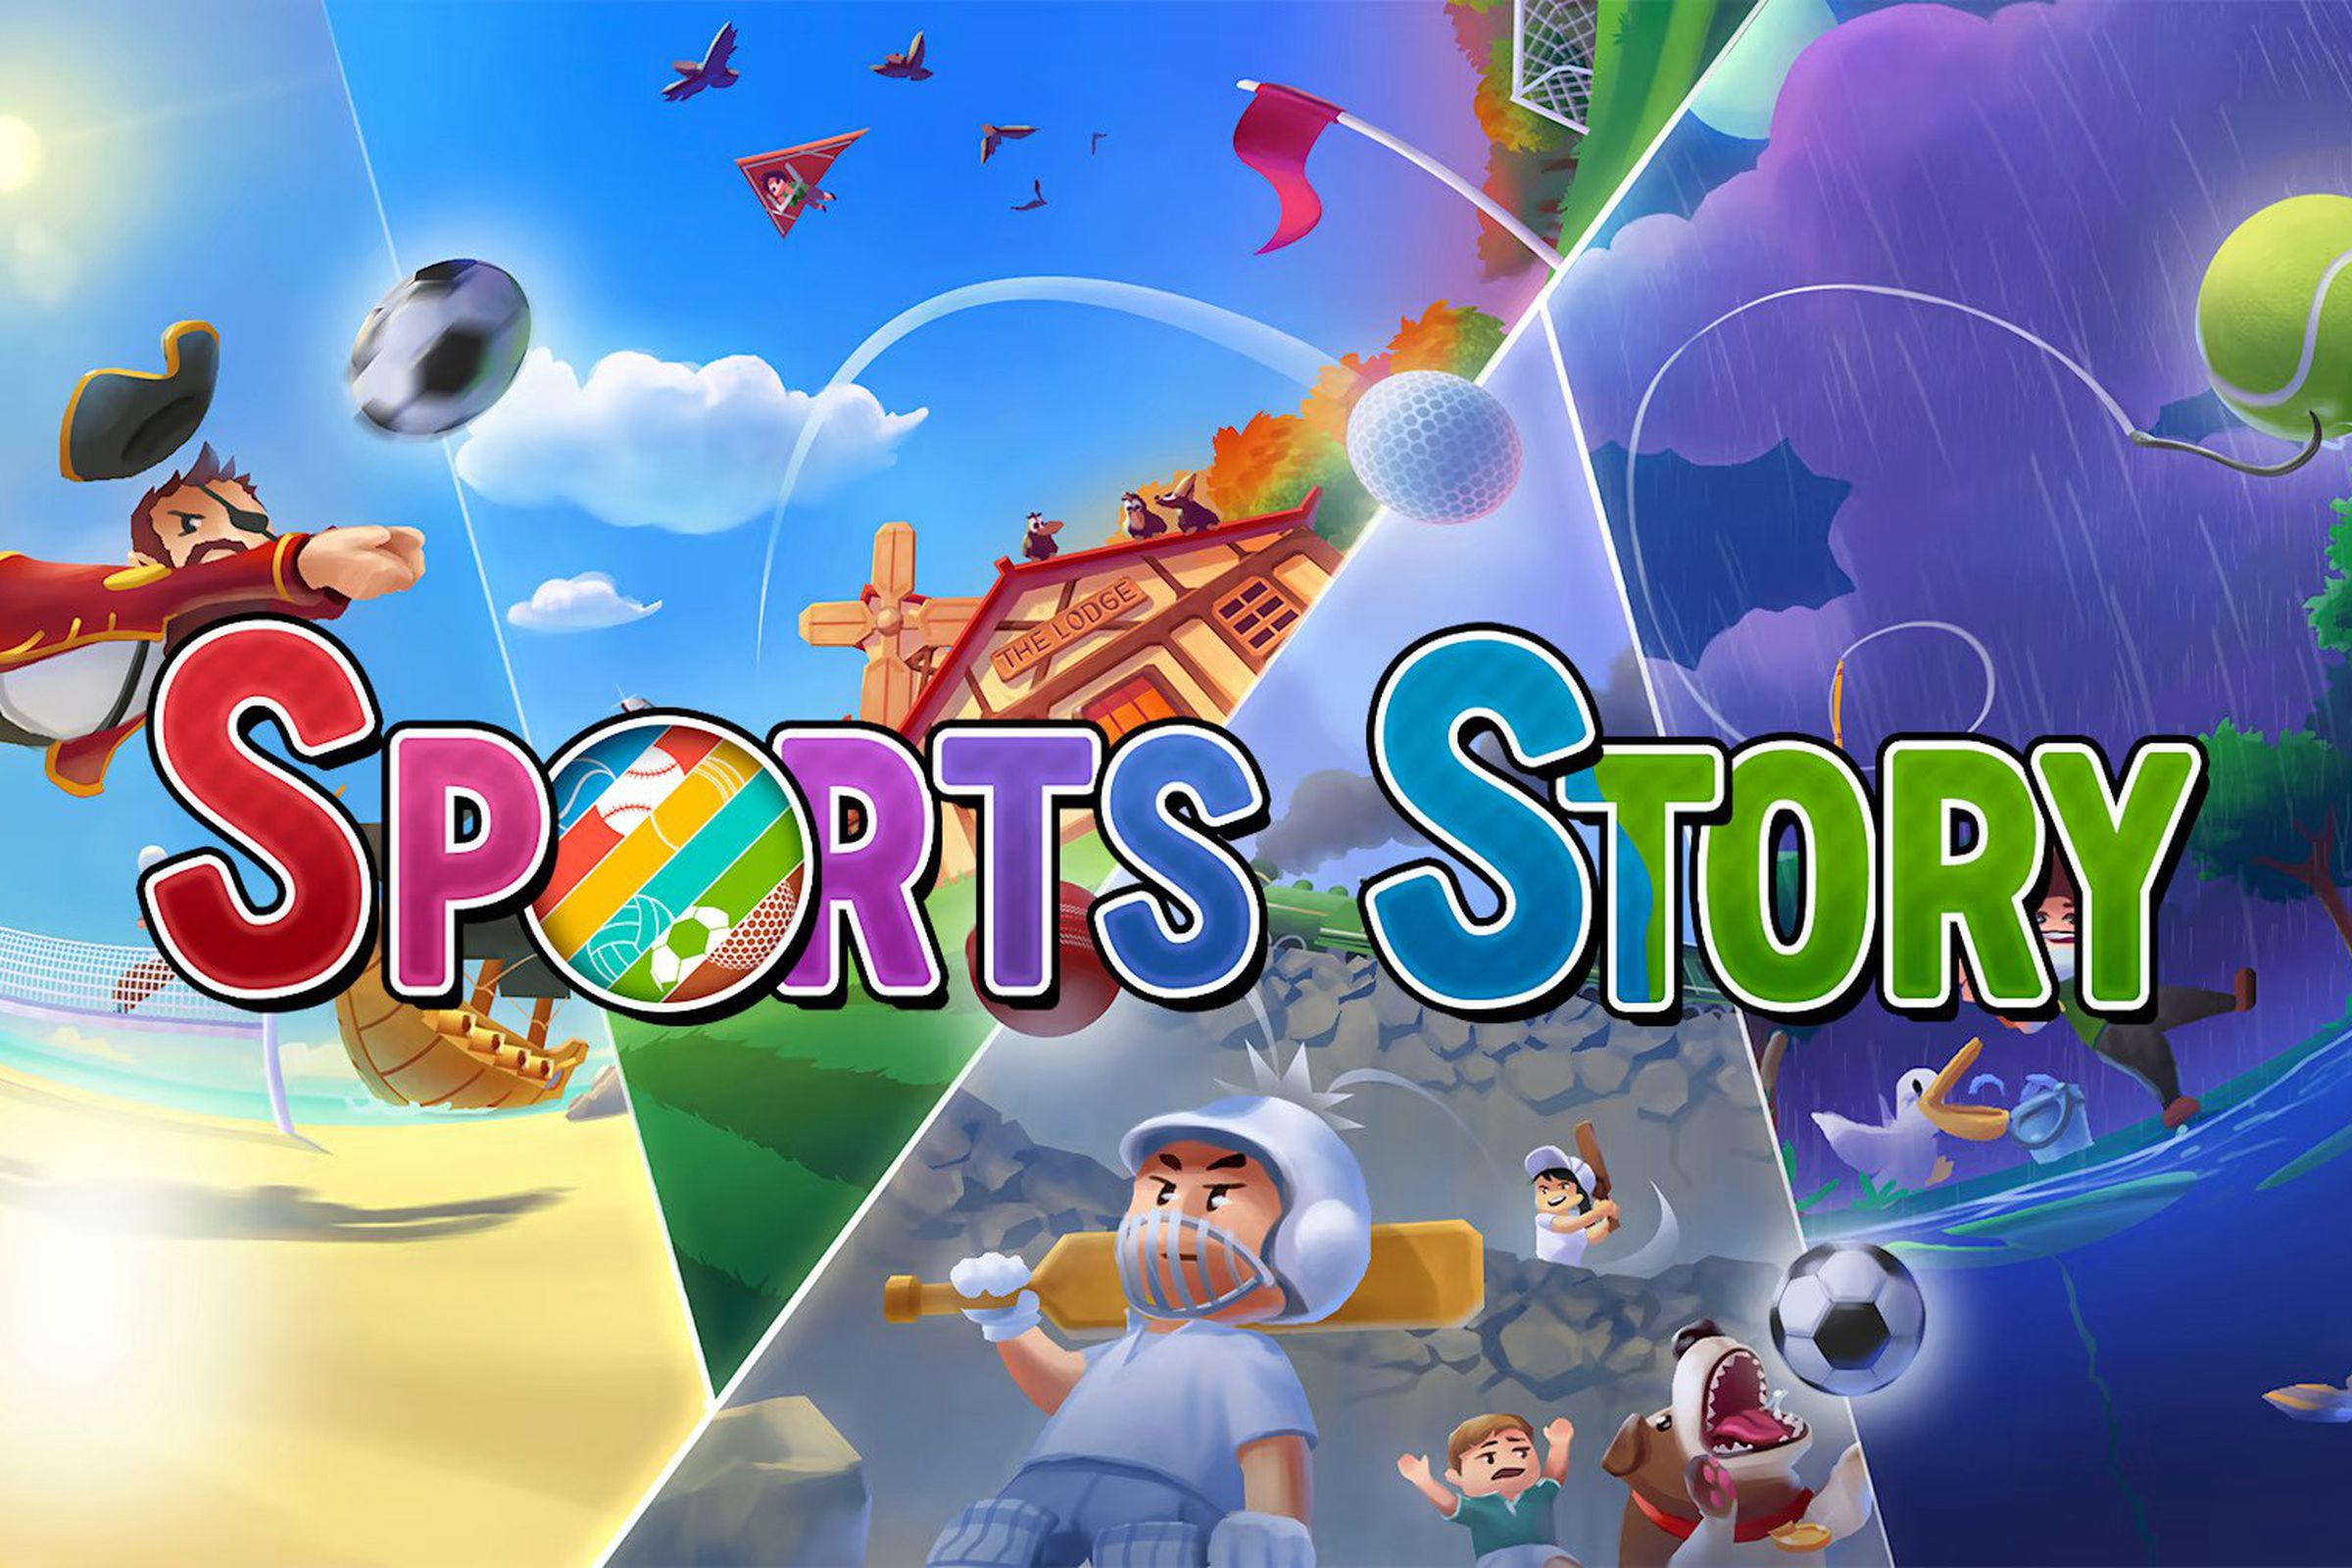 Graphic for Sports Story depicting a cartoon man engaged in several sports, like cricket, volleyball, and tennis.